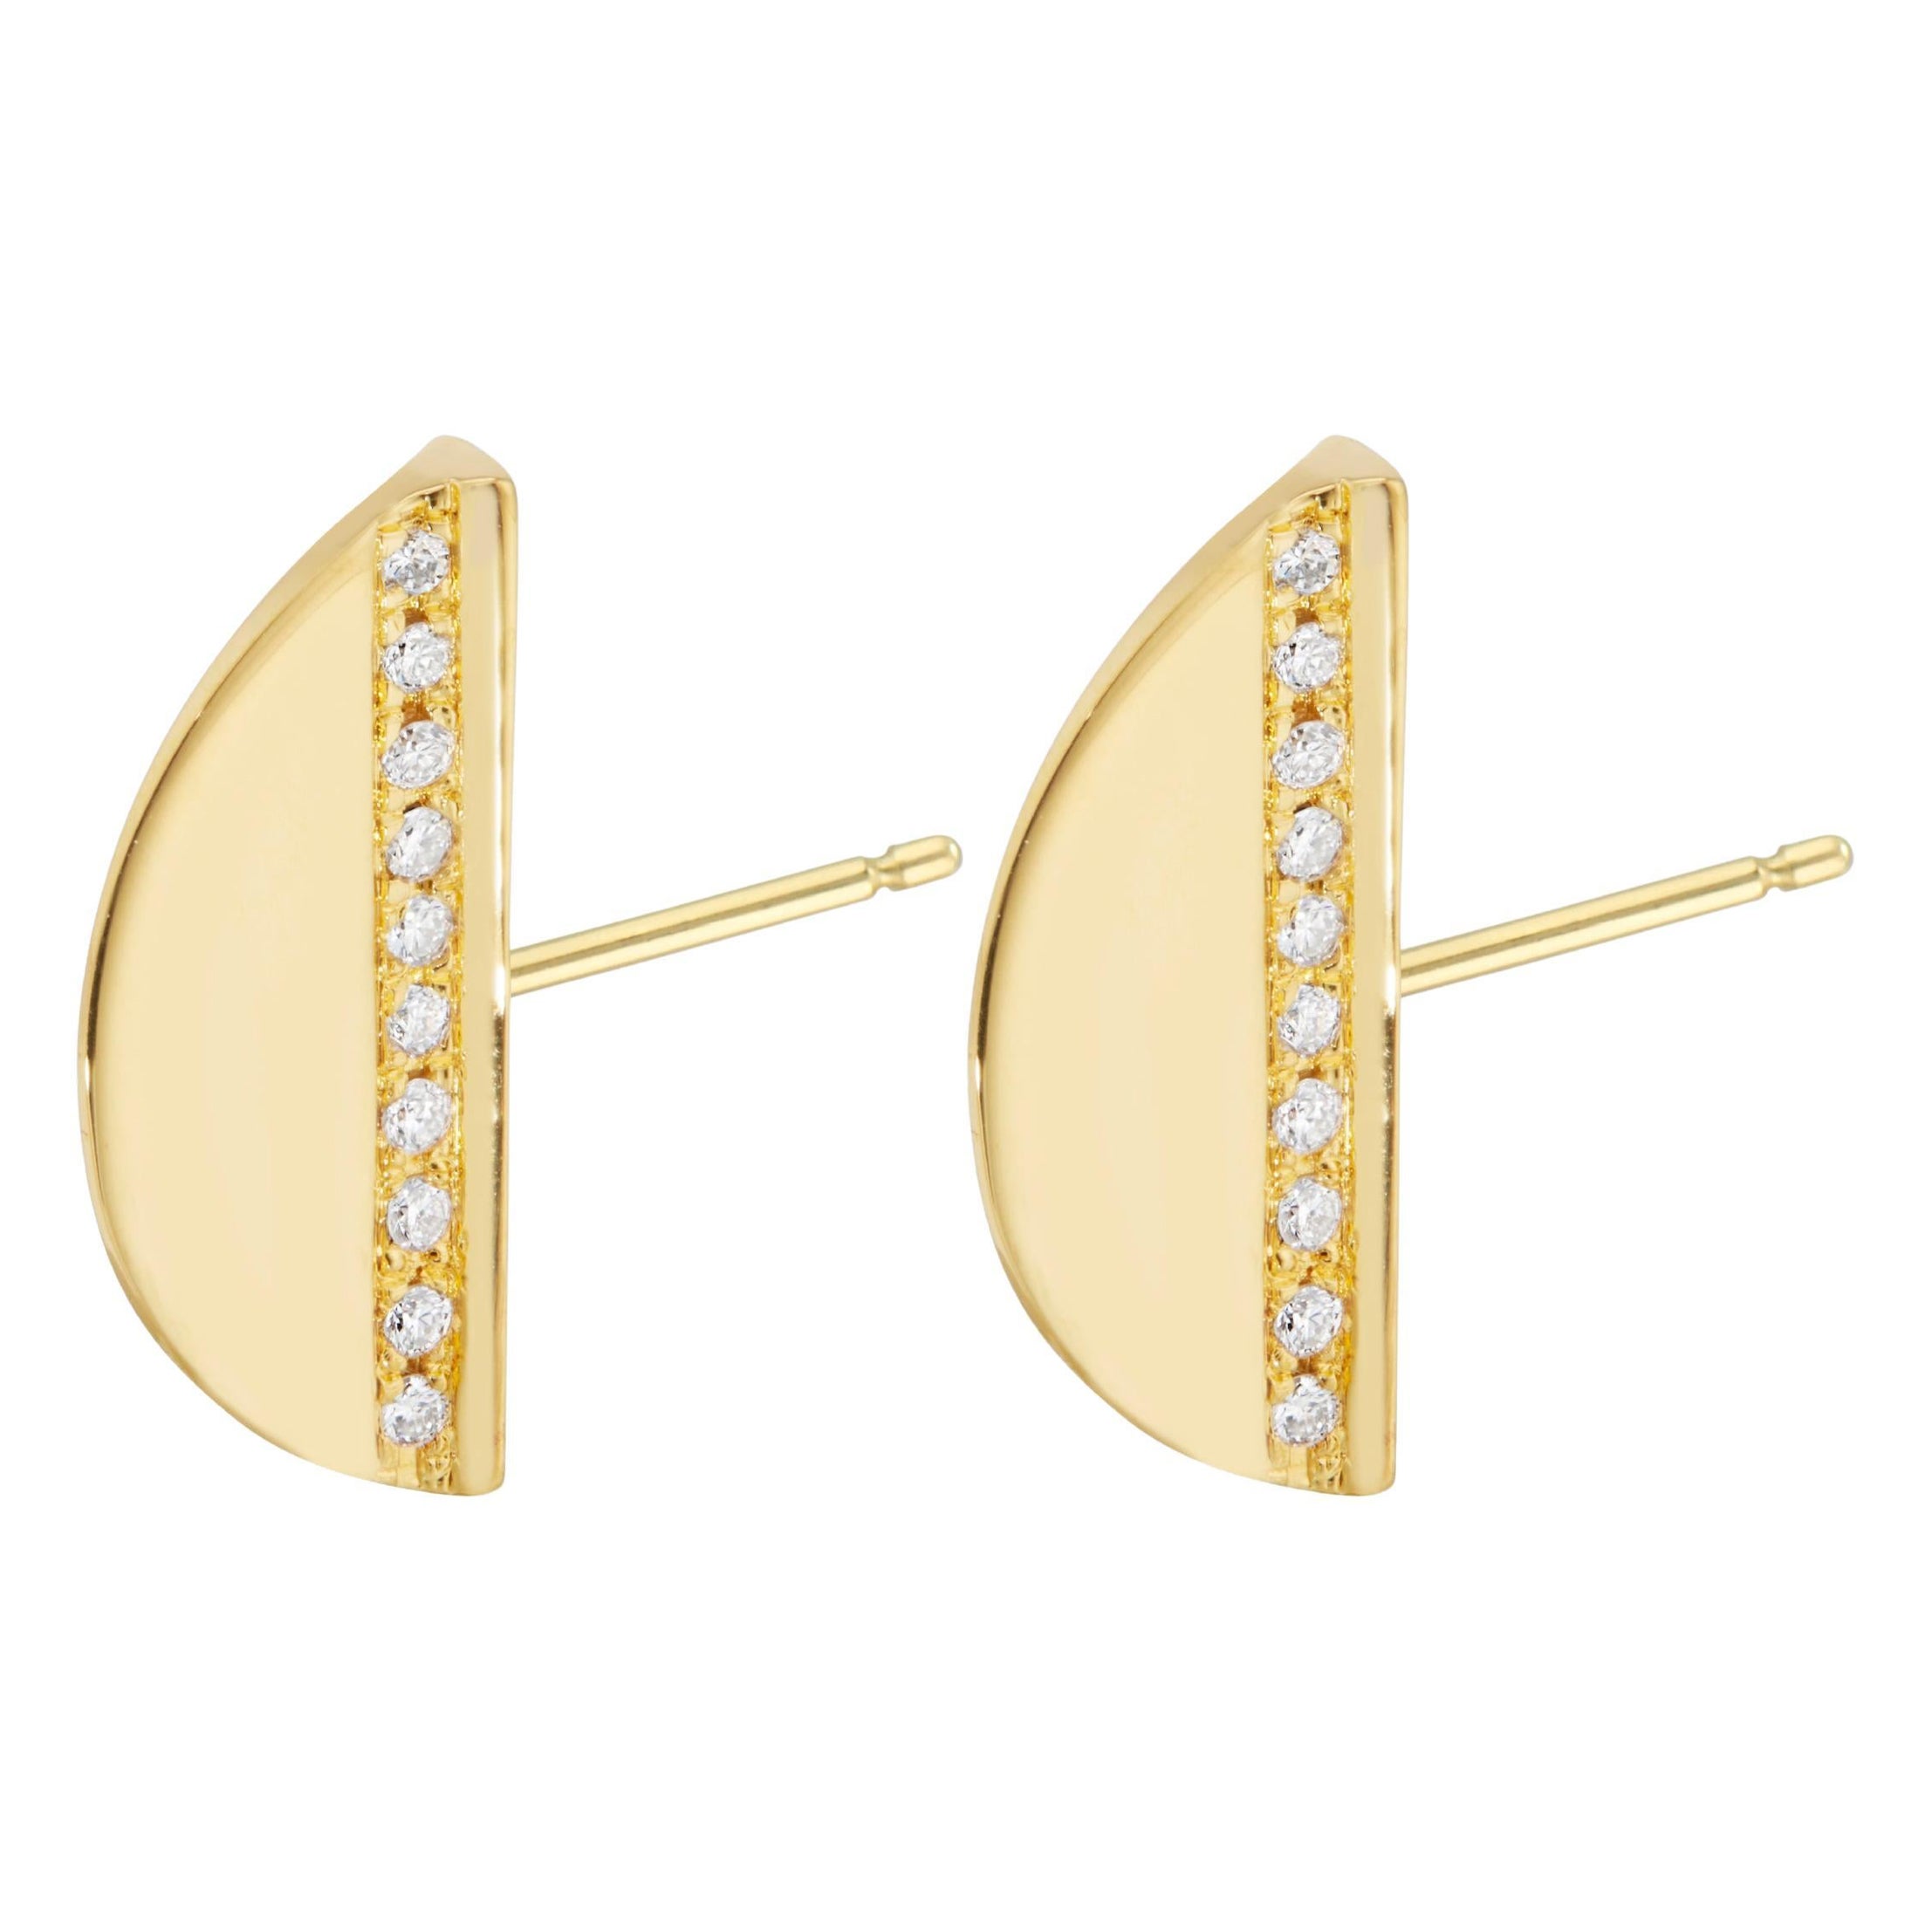 22K GV Half Crescent Earrings with Natural Diamonds by Chee Lee New York